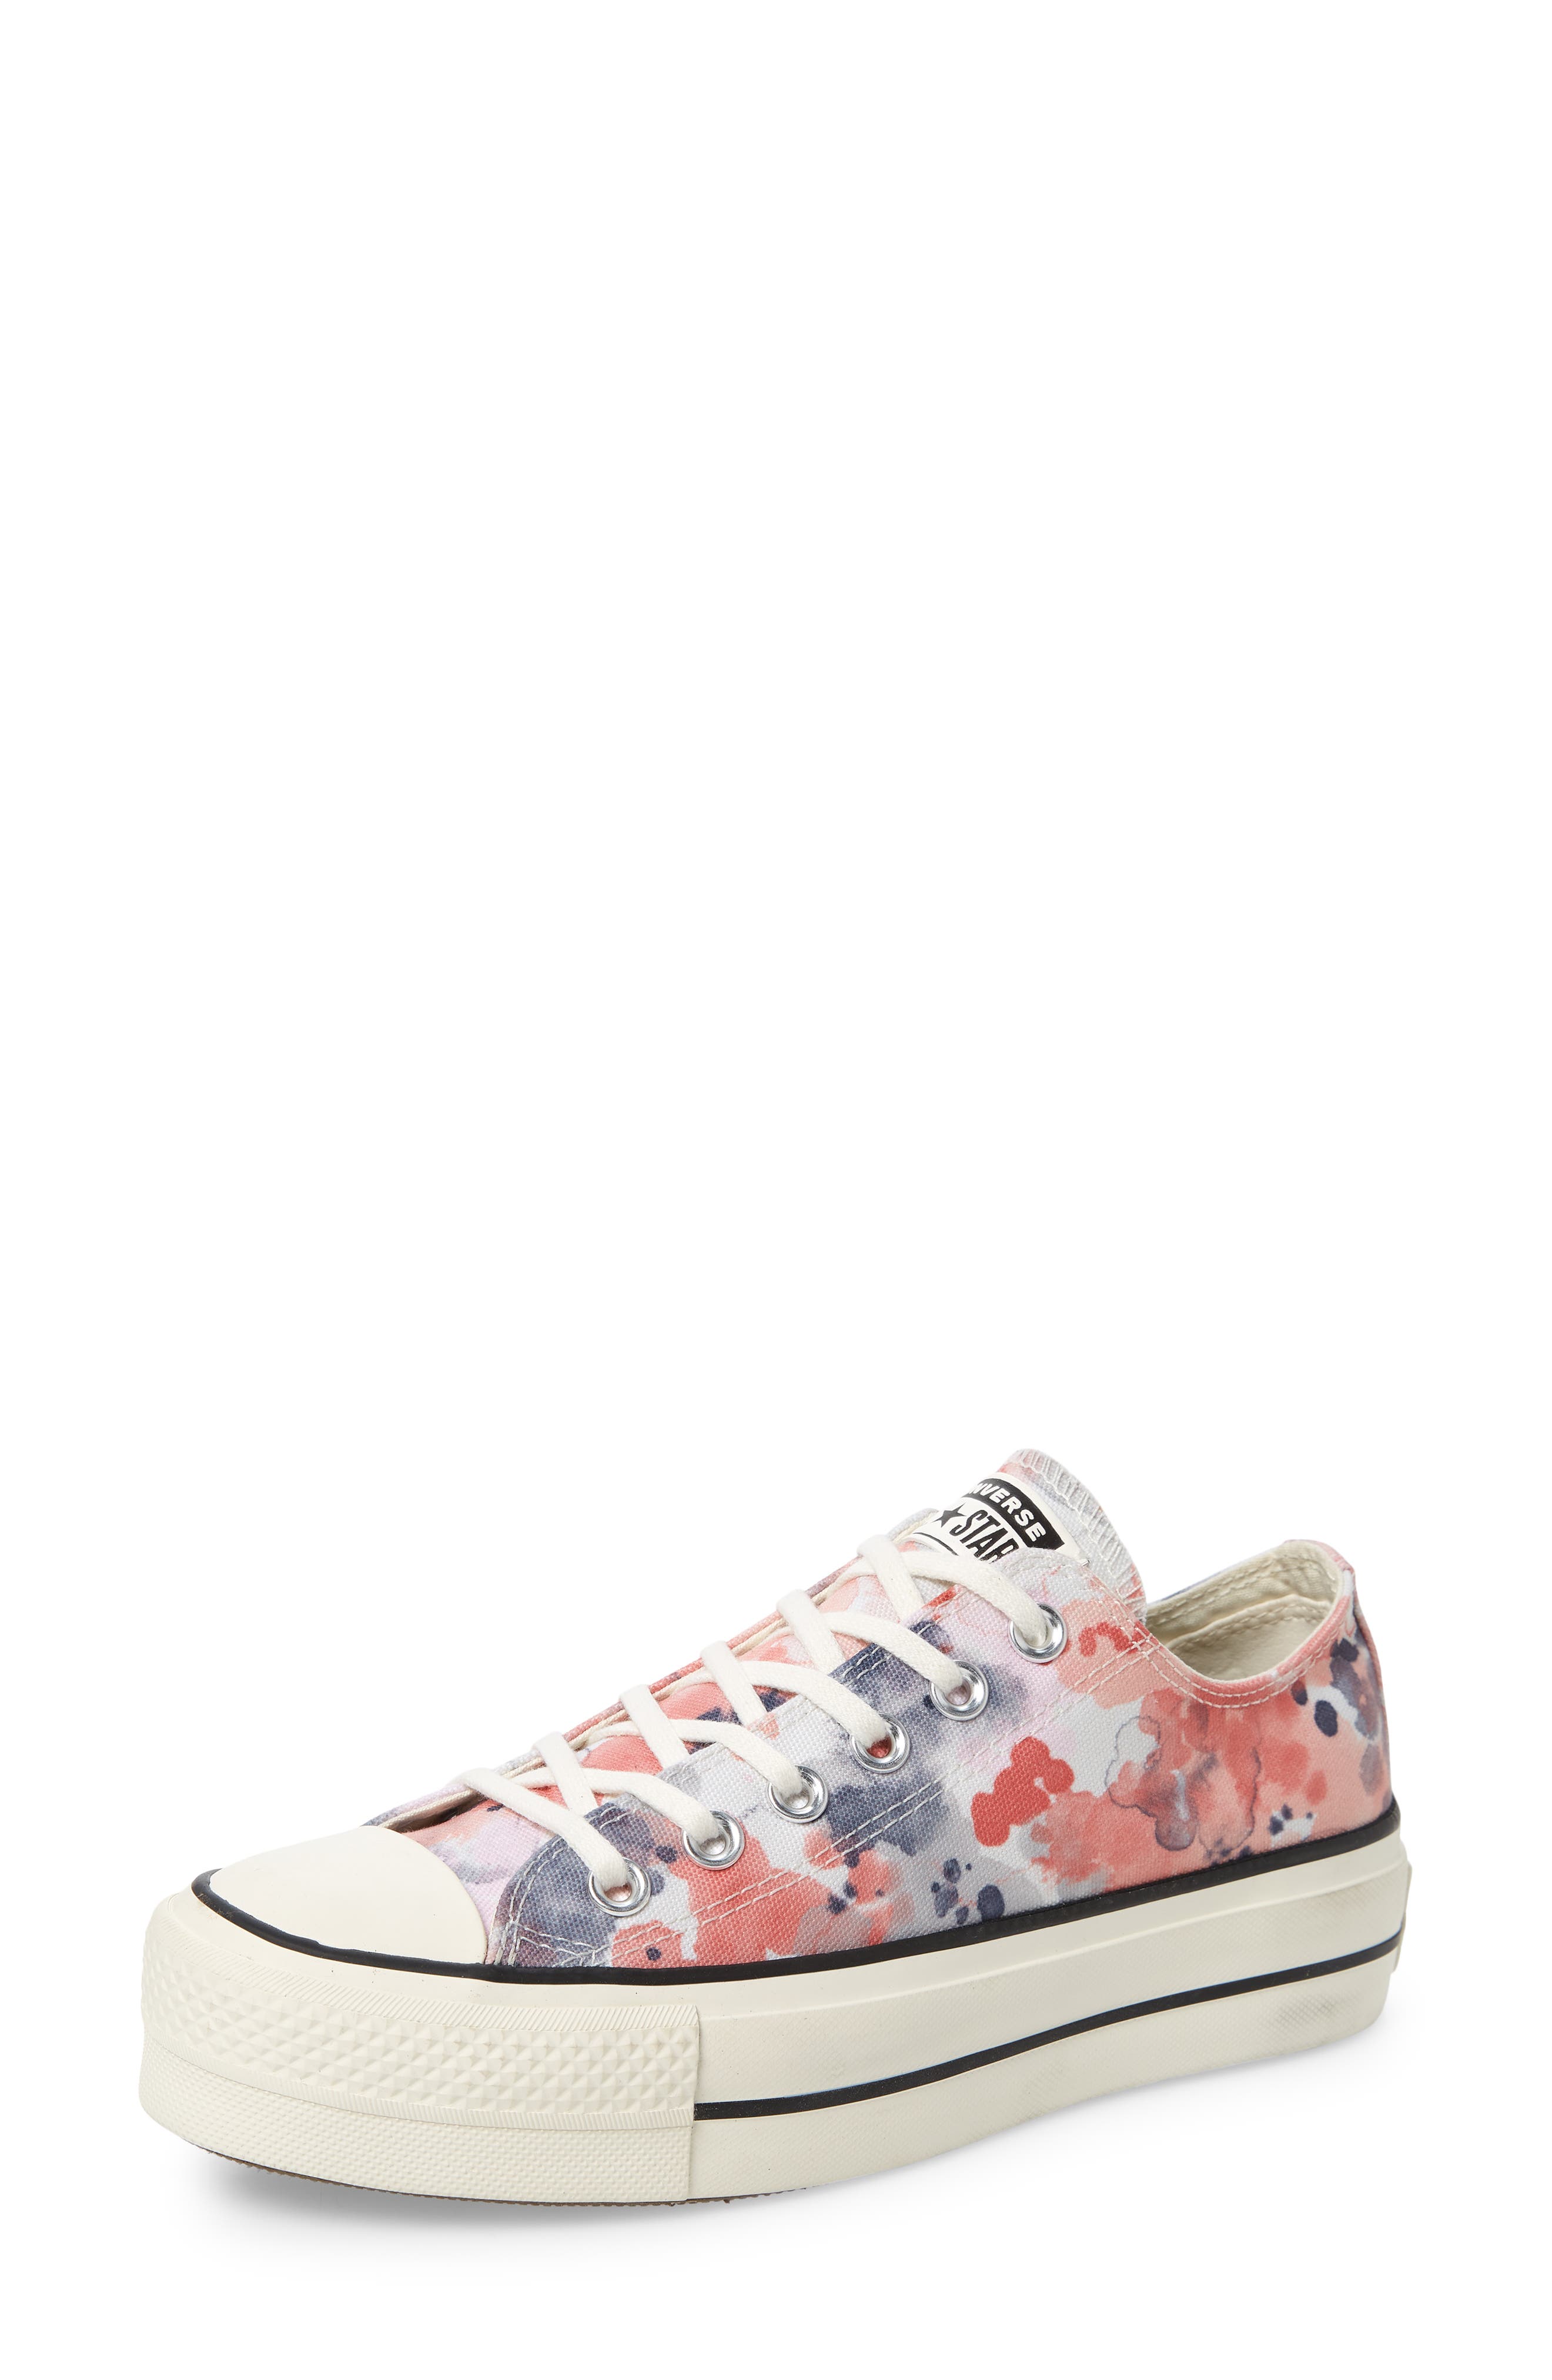 converse clearance womens